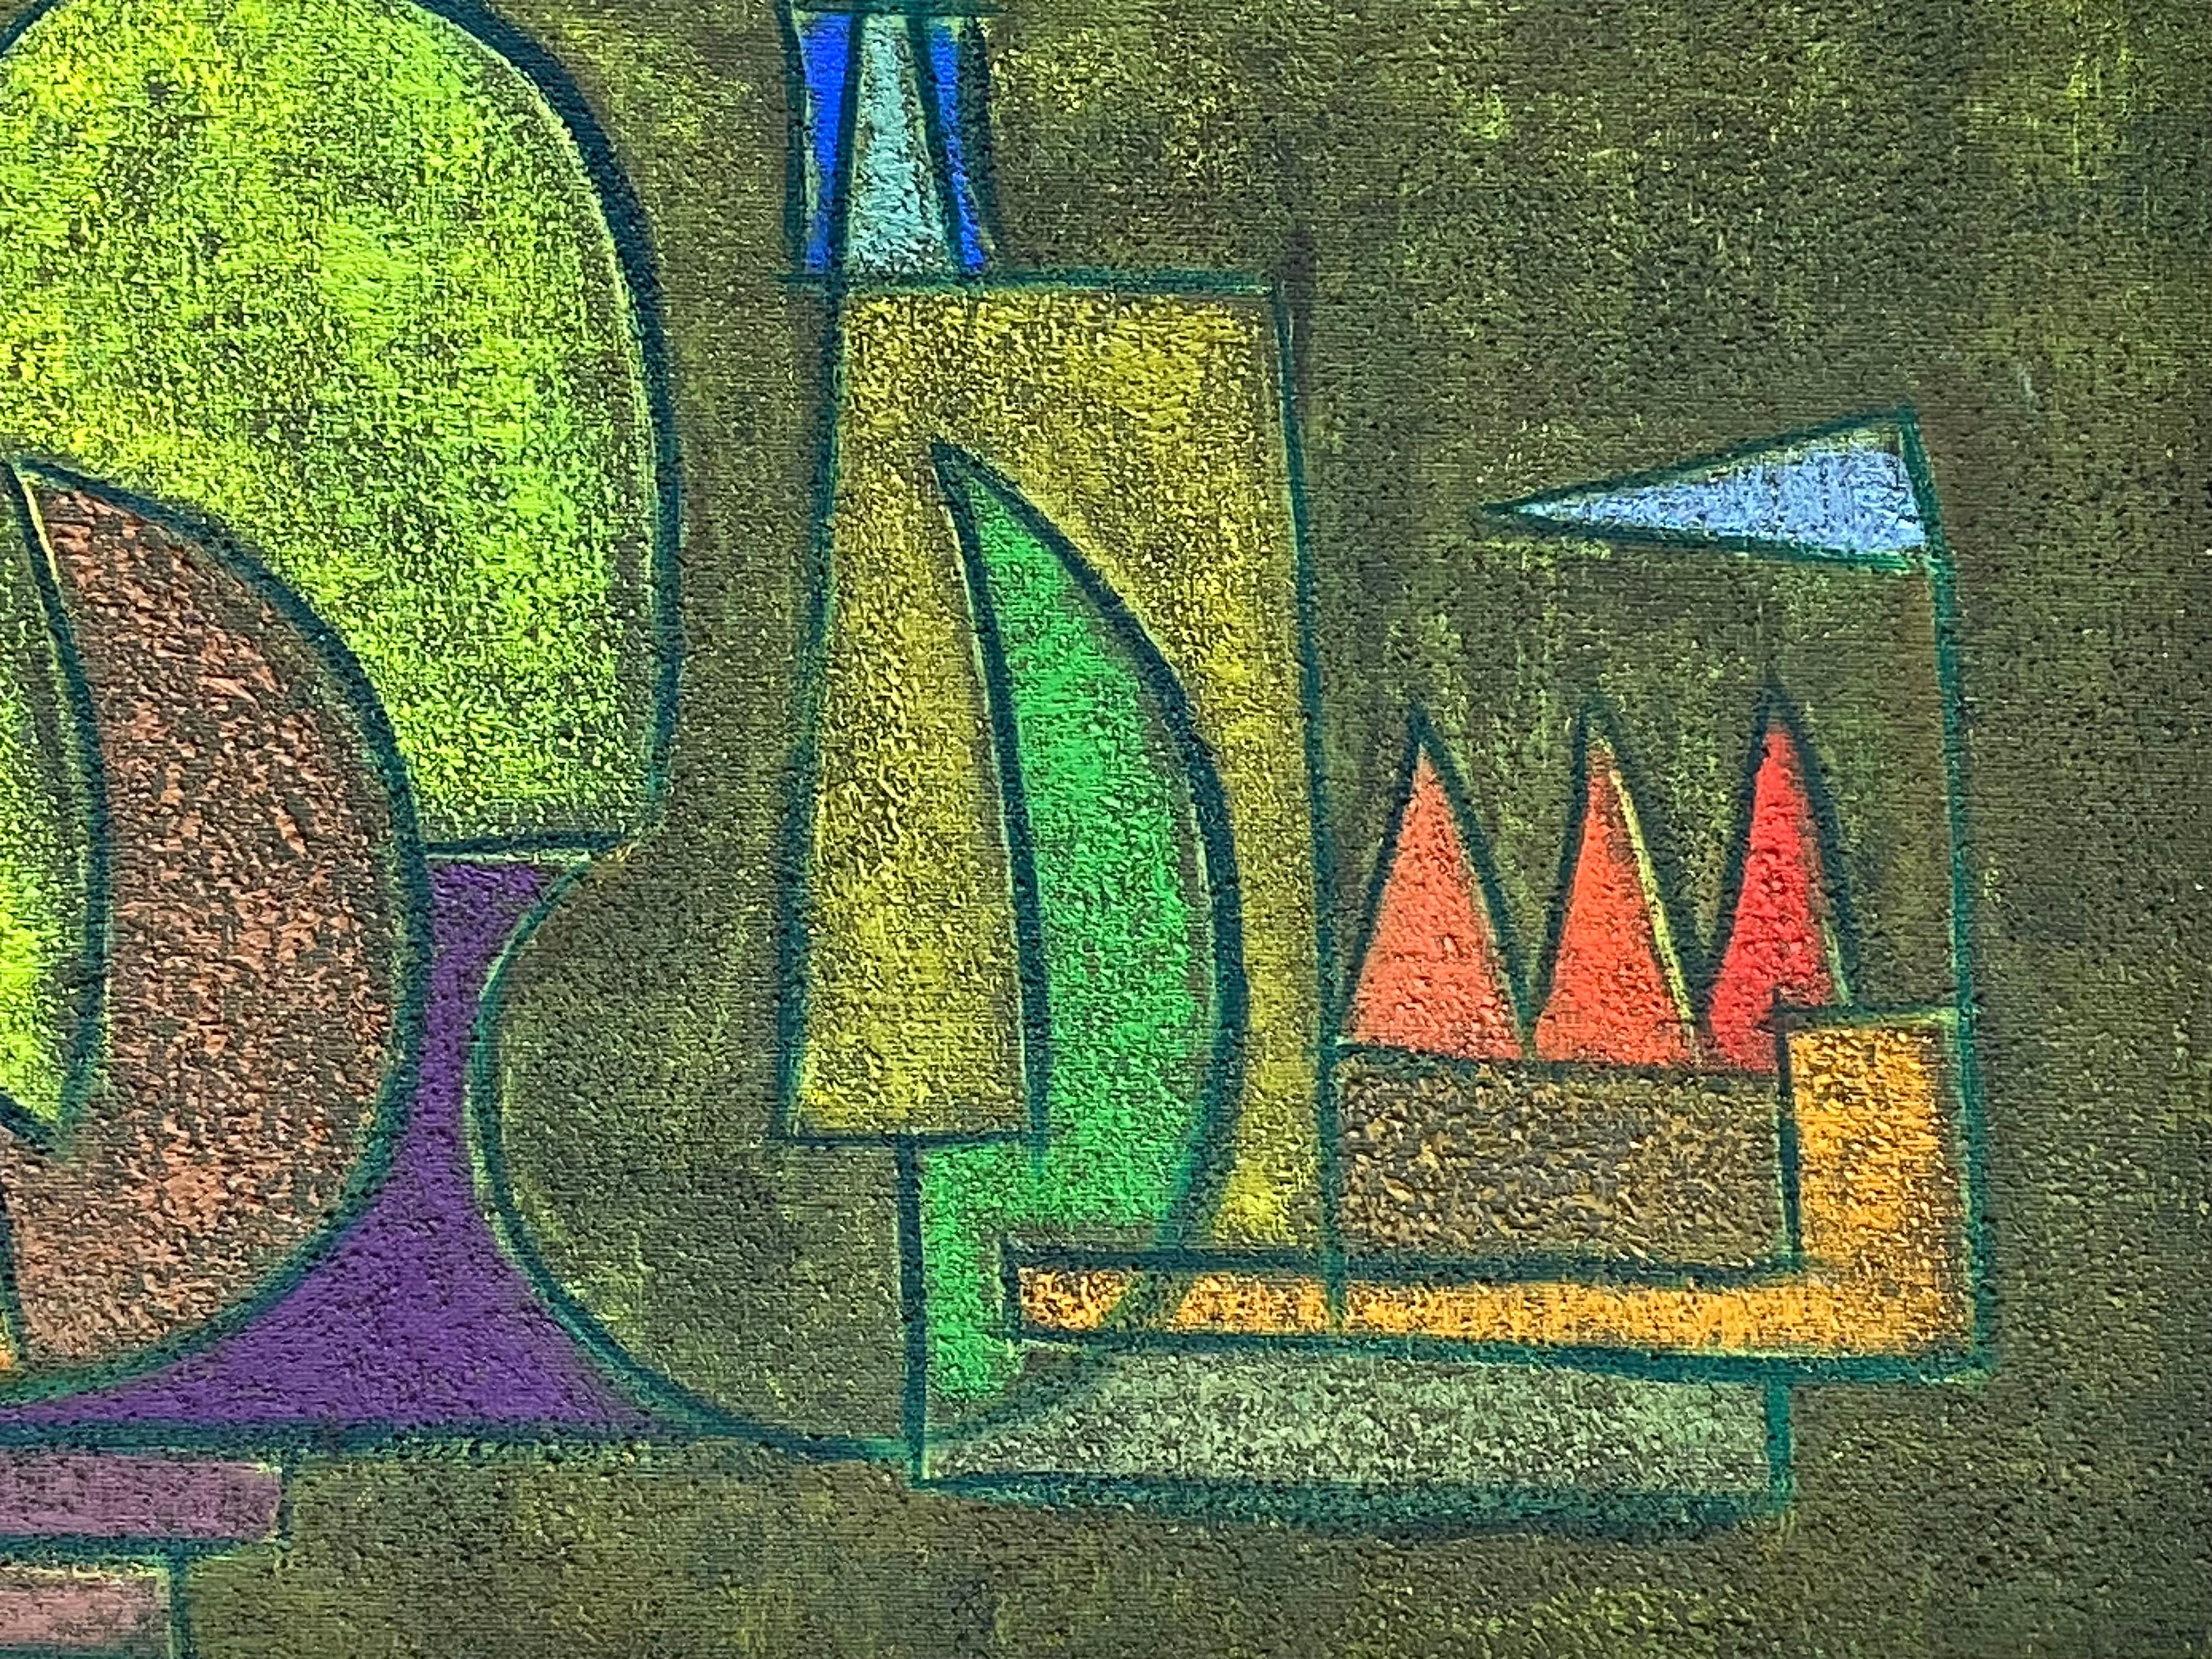 “Abstract Sailboats” - American Modern Painting by William Katz